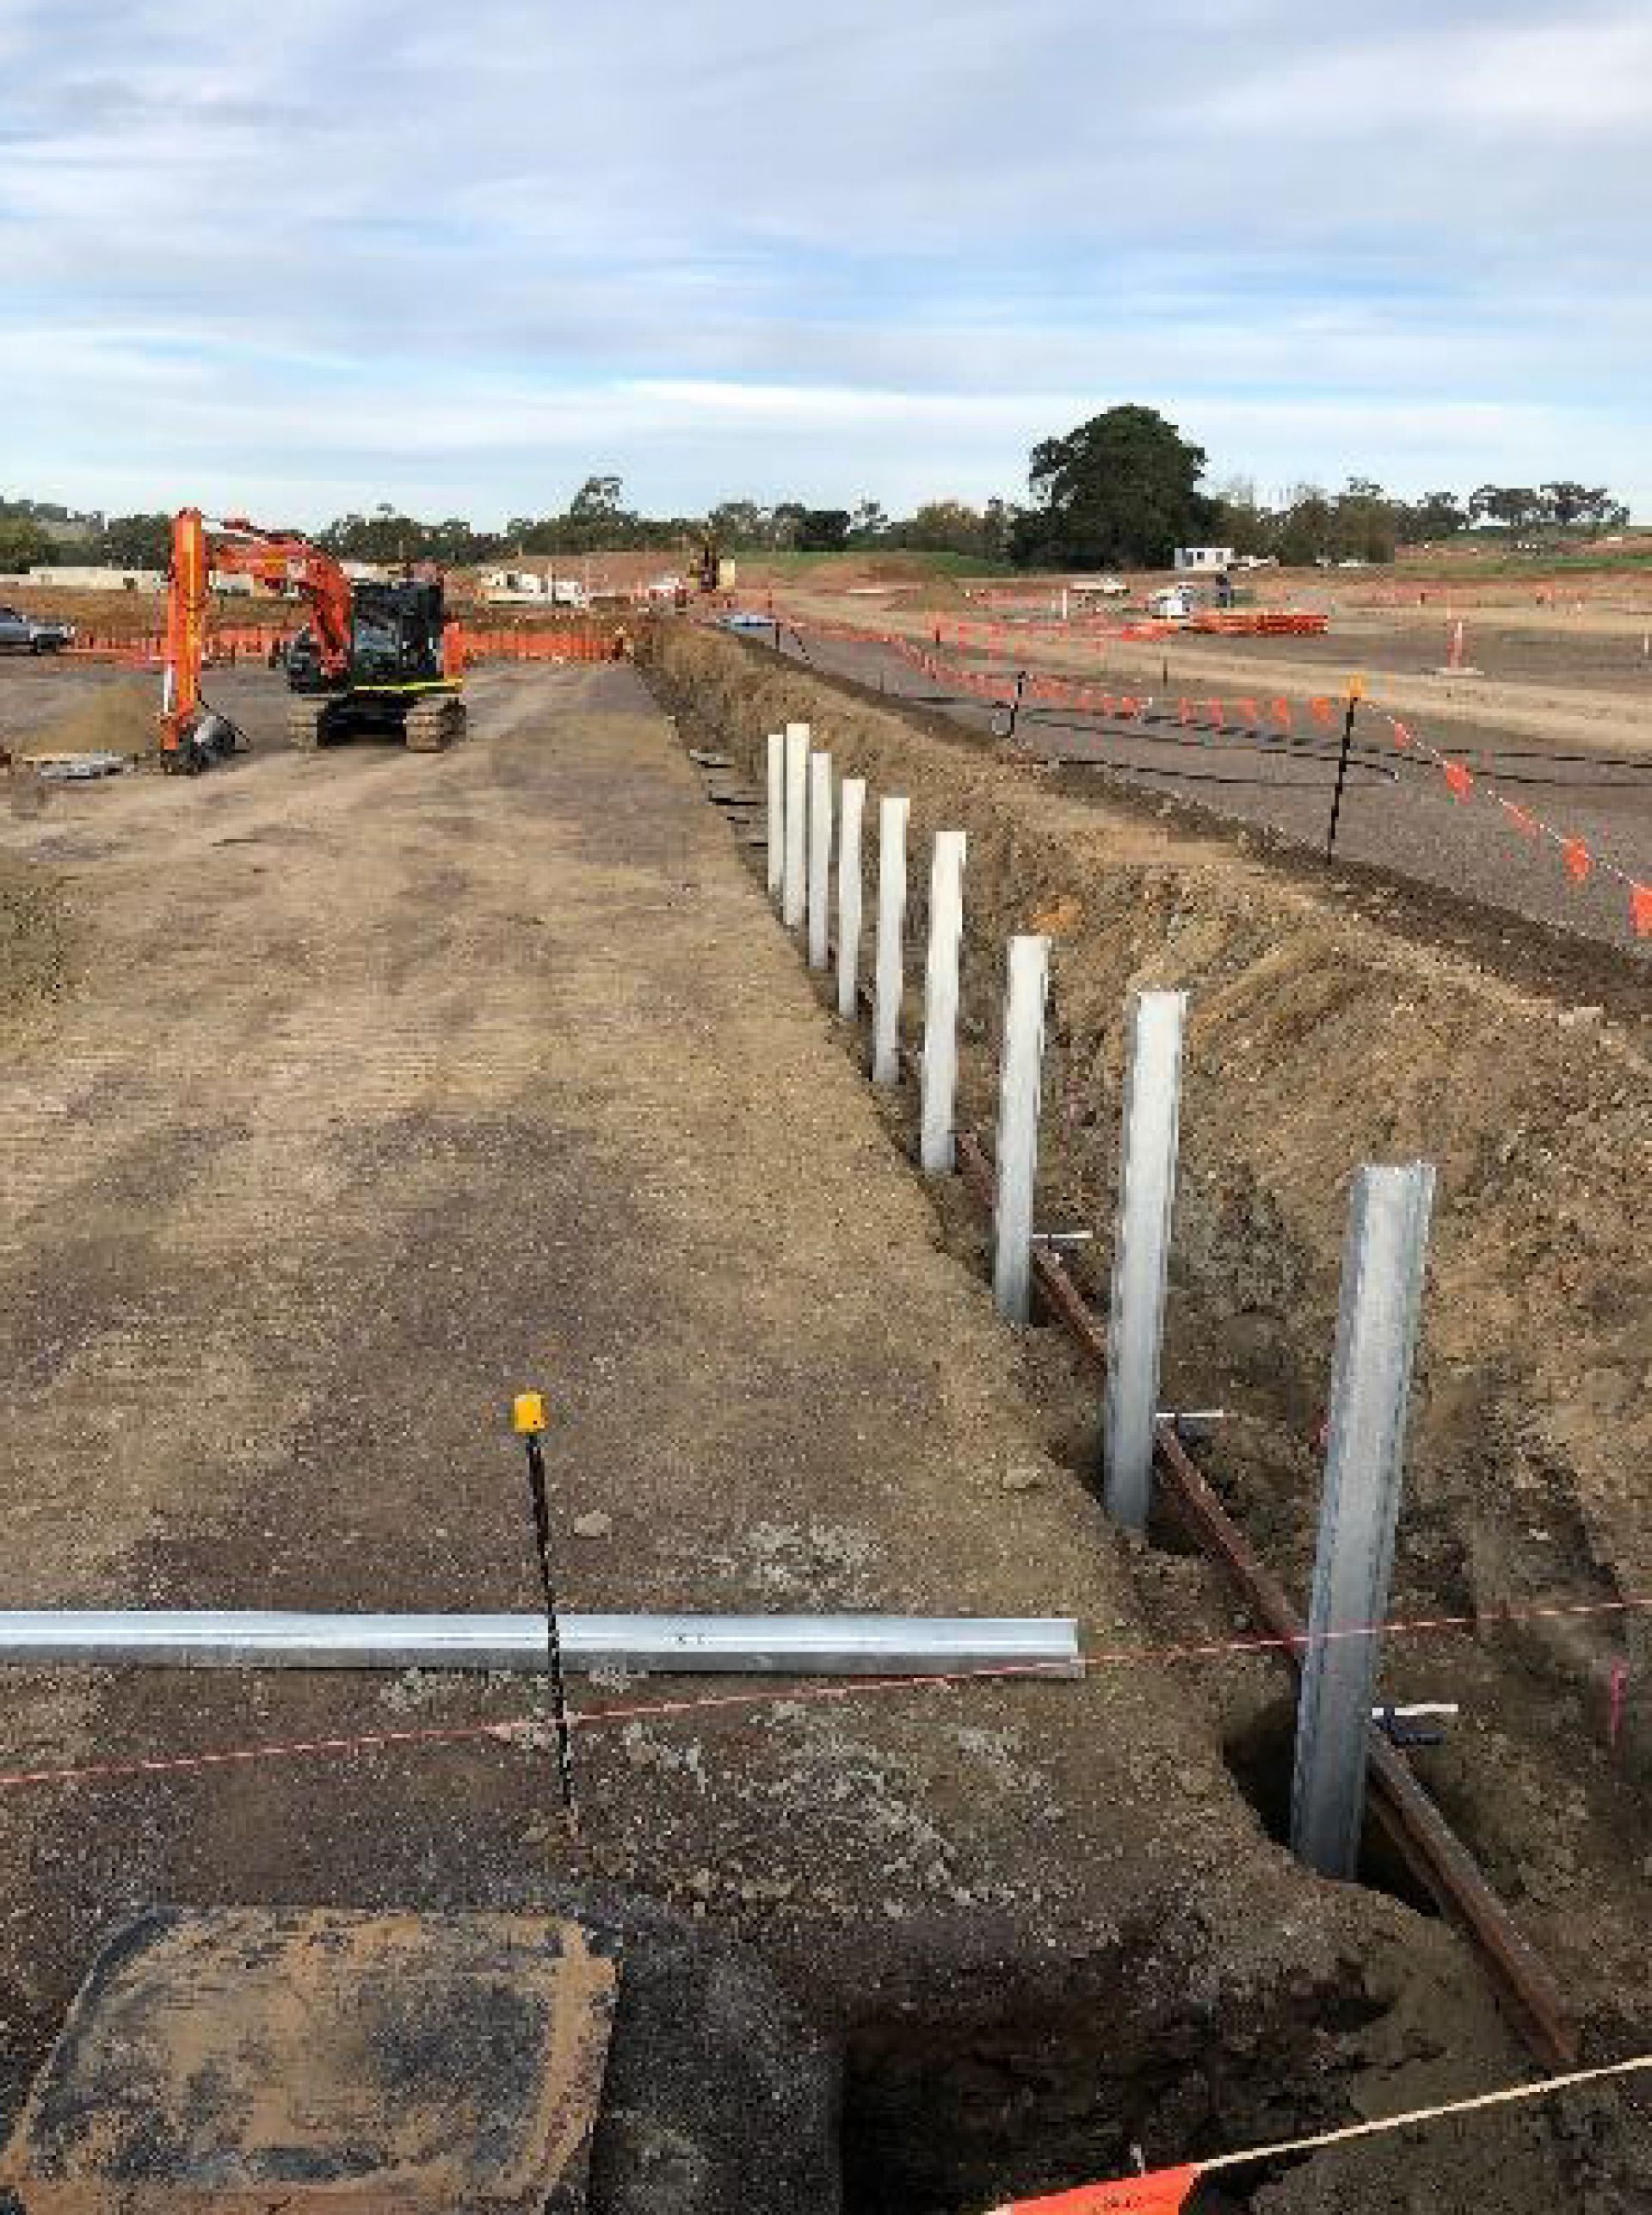 RSH lower carparksoccer pitch retaining walls under construction Early May 2020